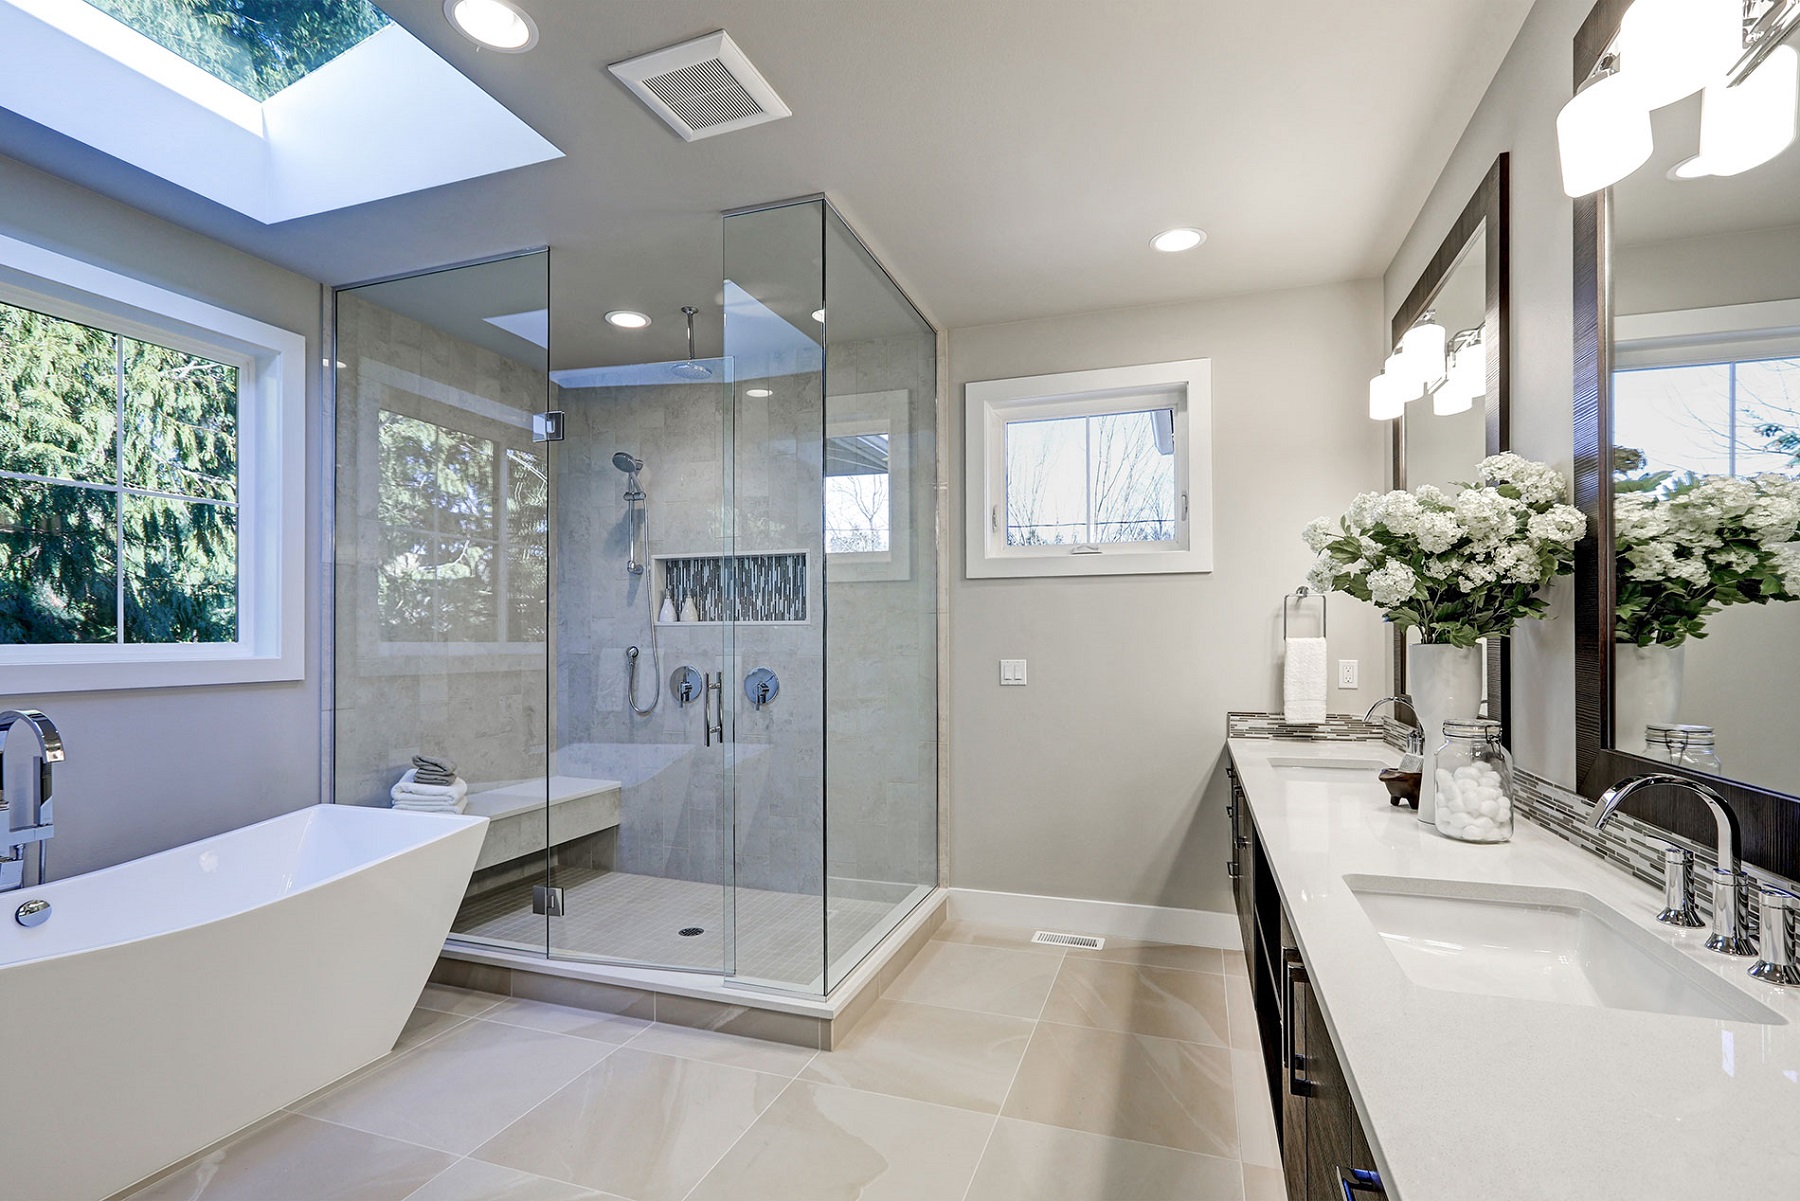 Bathroom Shower Remodel Cost, How Much Does It Cost To Replace A Bathroom Shower